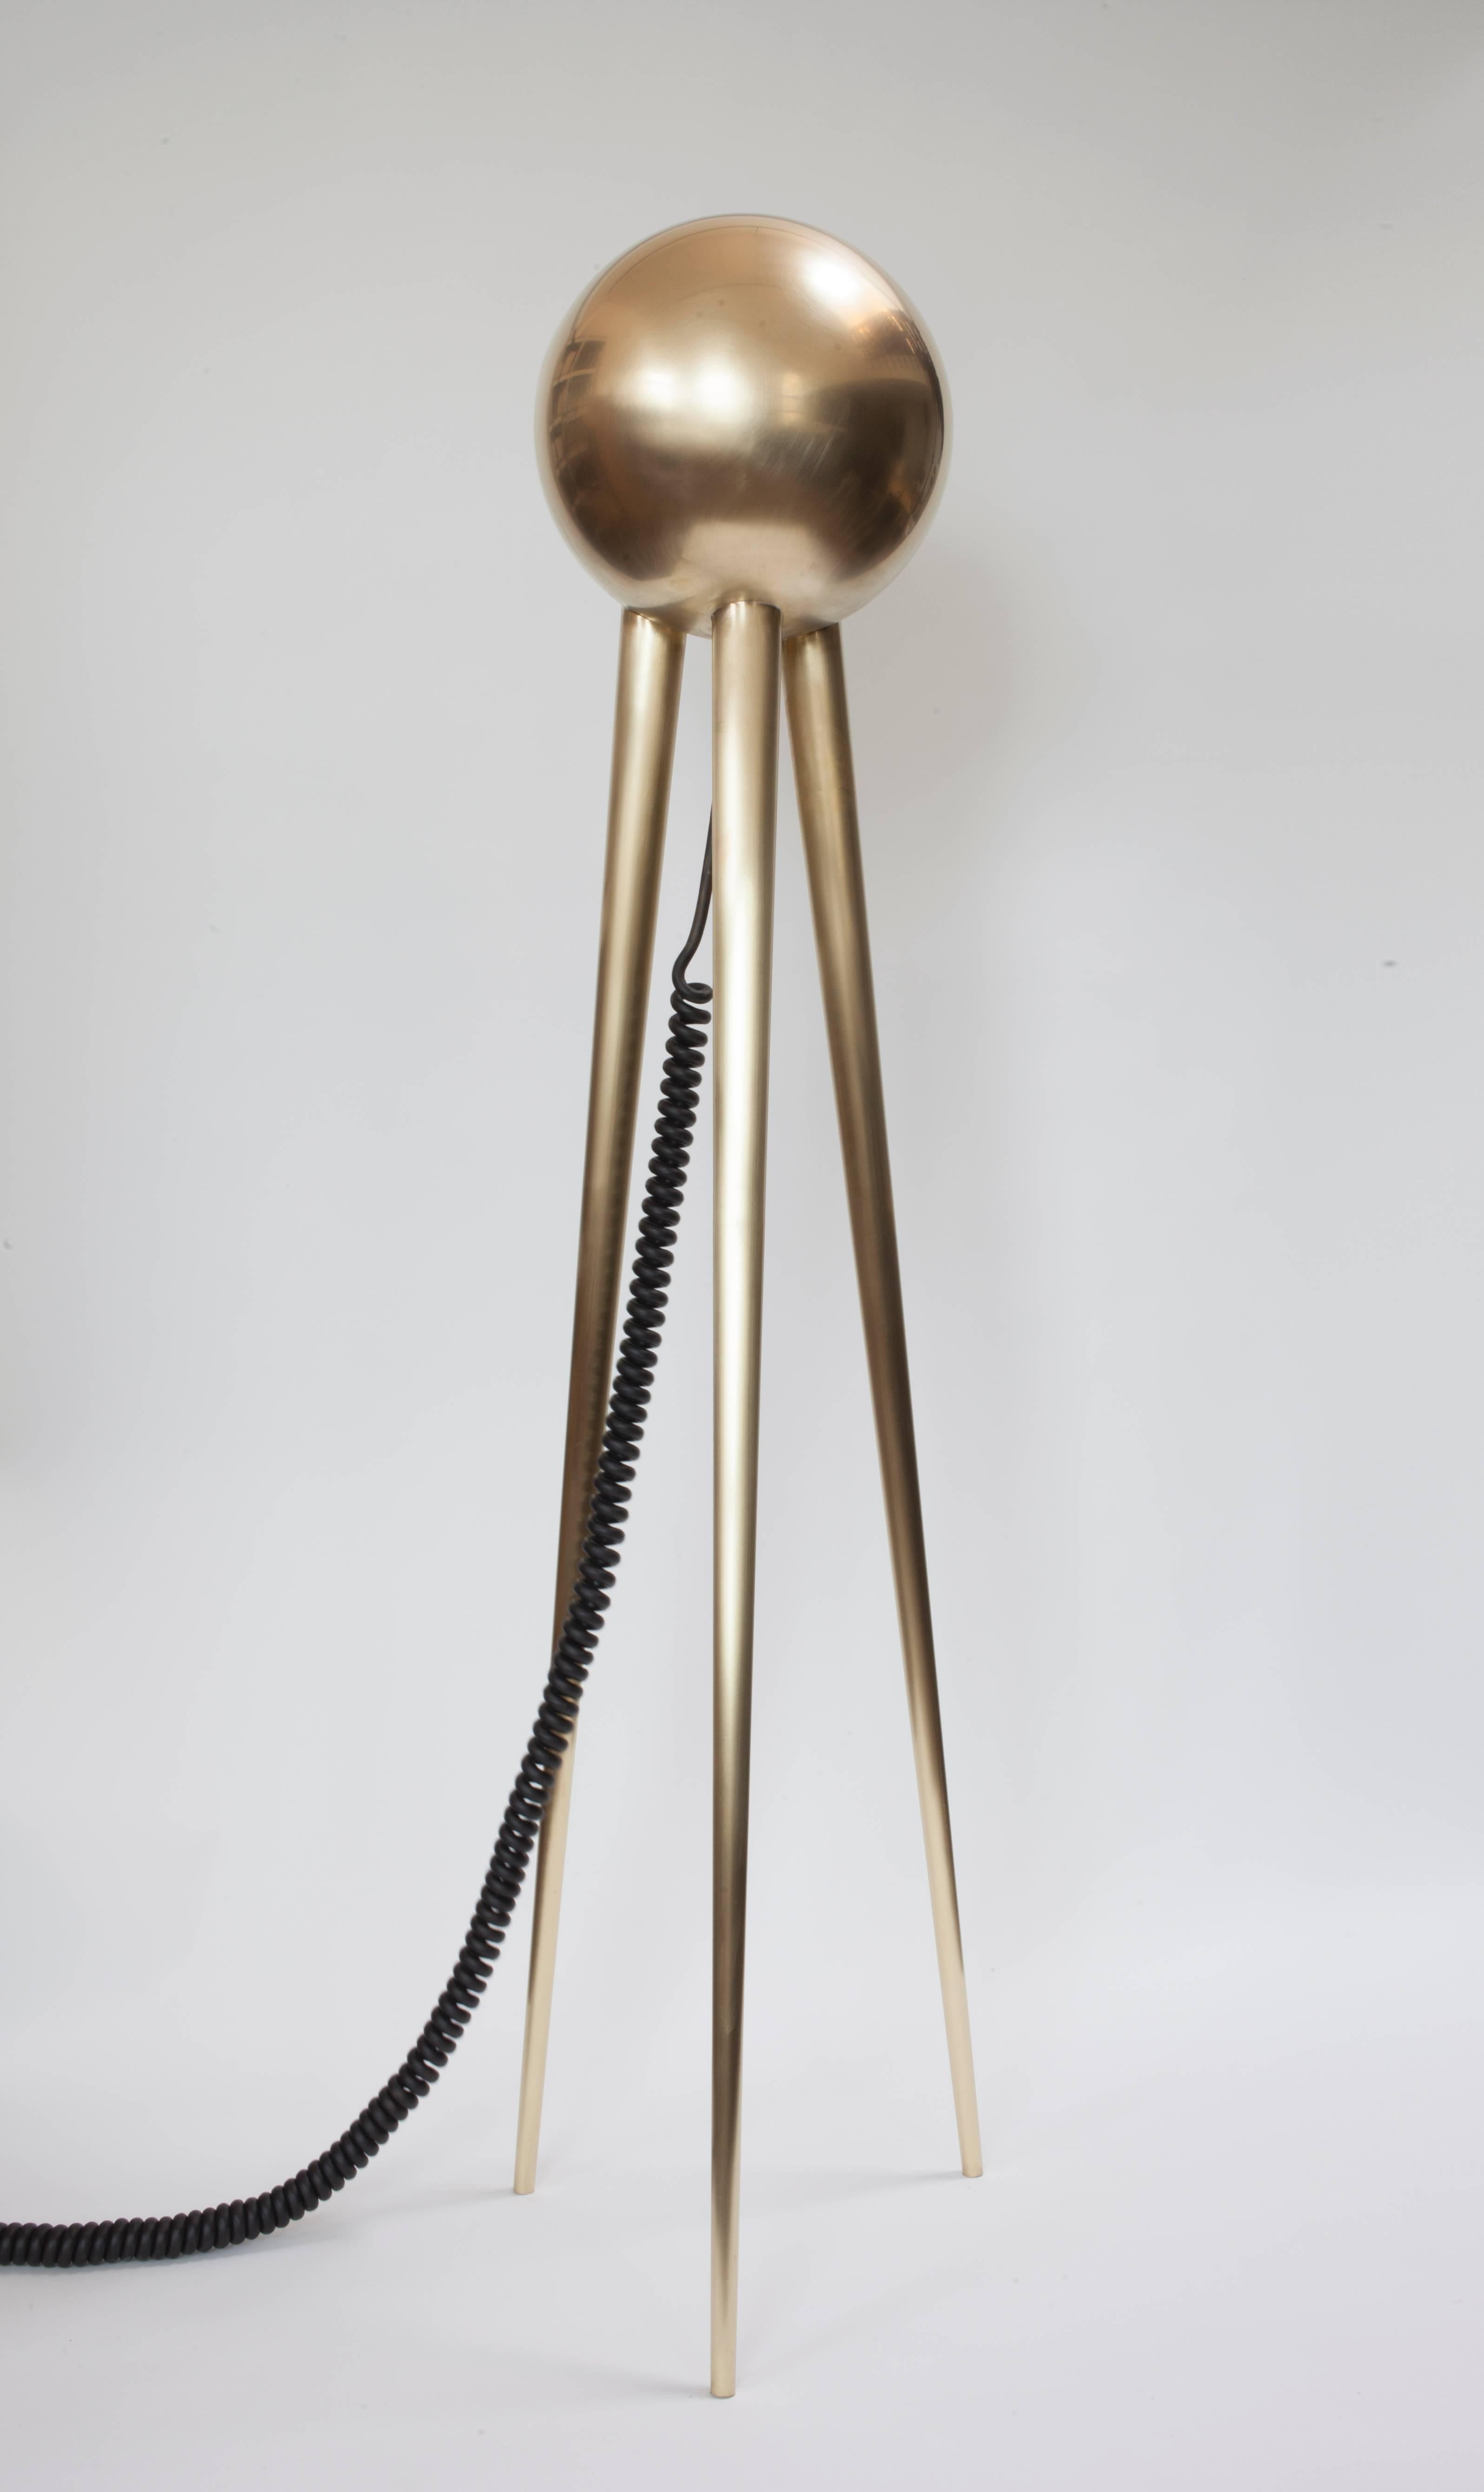 Italian Contemporary 'Crepuscule' Floor Lamp by Material Lust, 2016 For Sale